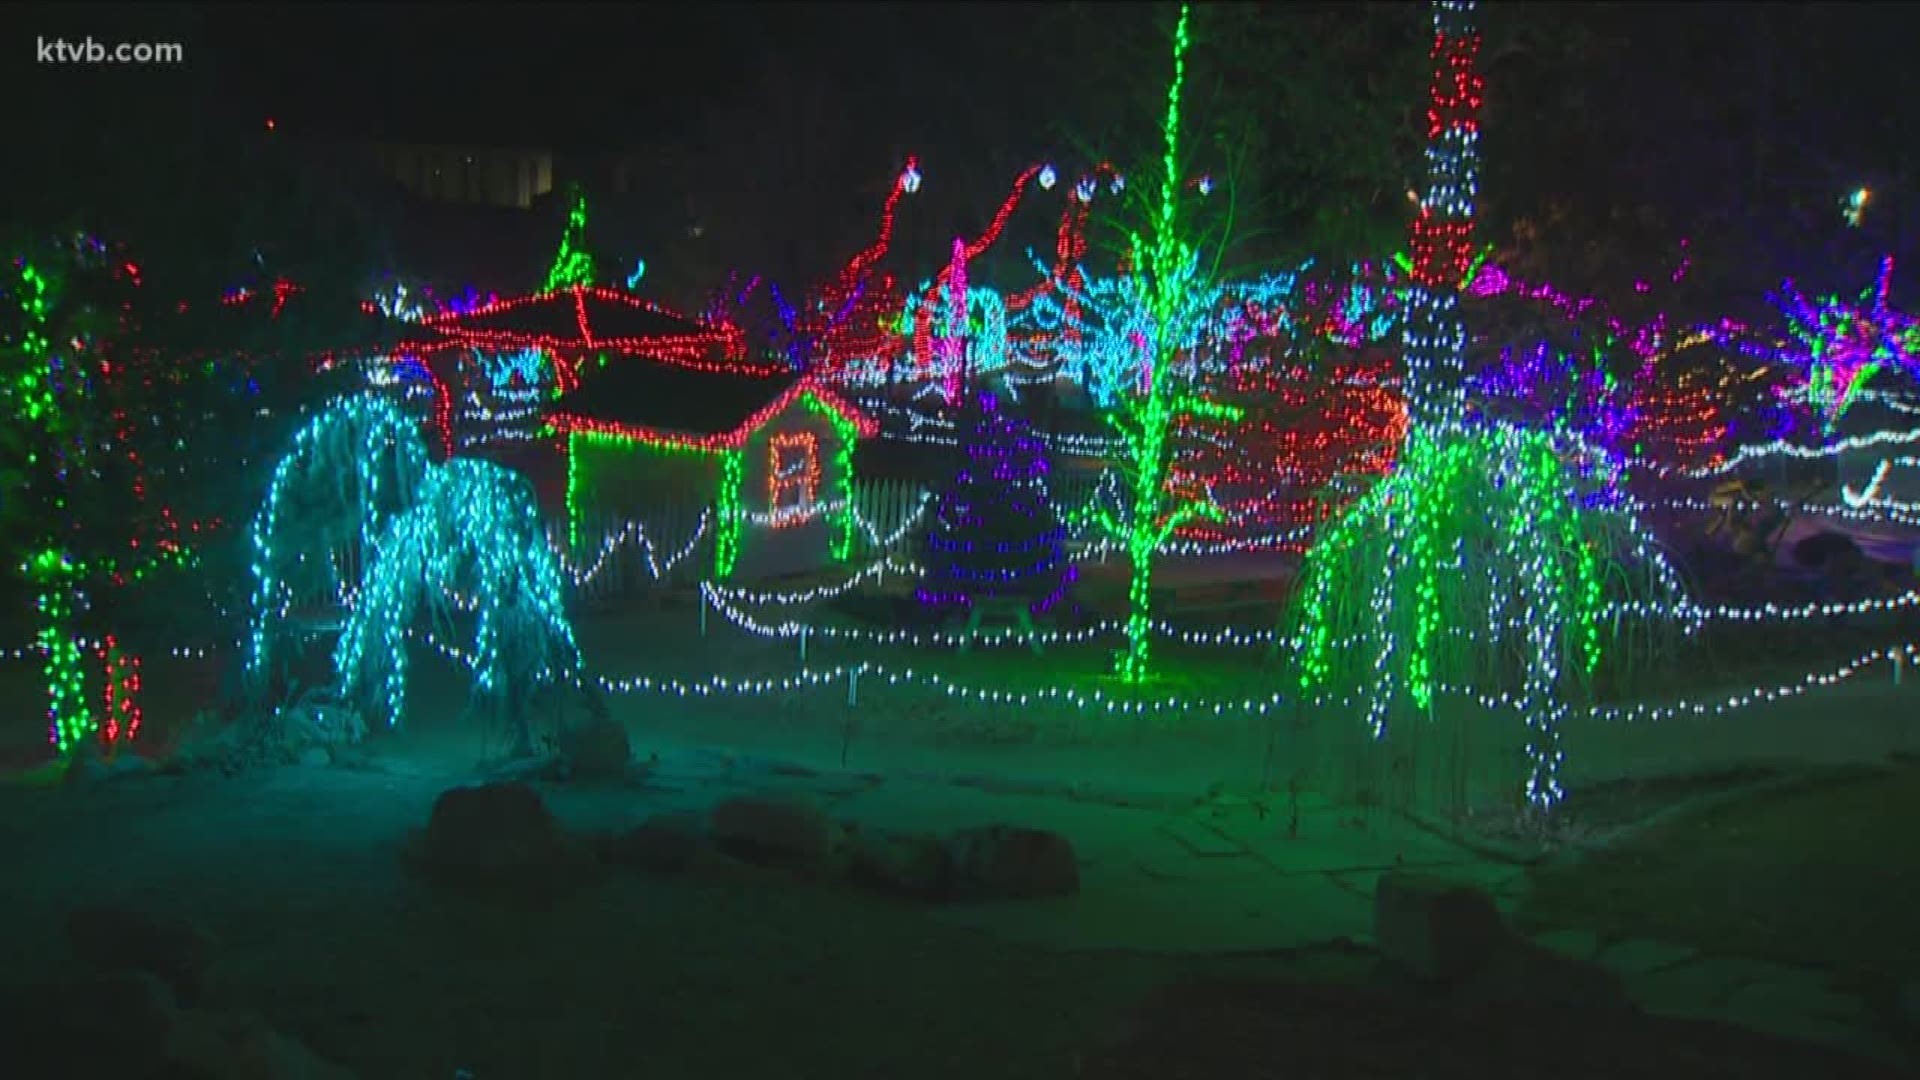 With over 550,000 energy-efficient lights adorned across 14 acres, the popular annual light show will open to the public Thanksgiving evening.